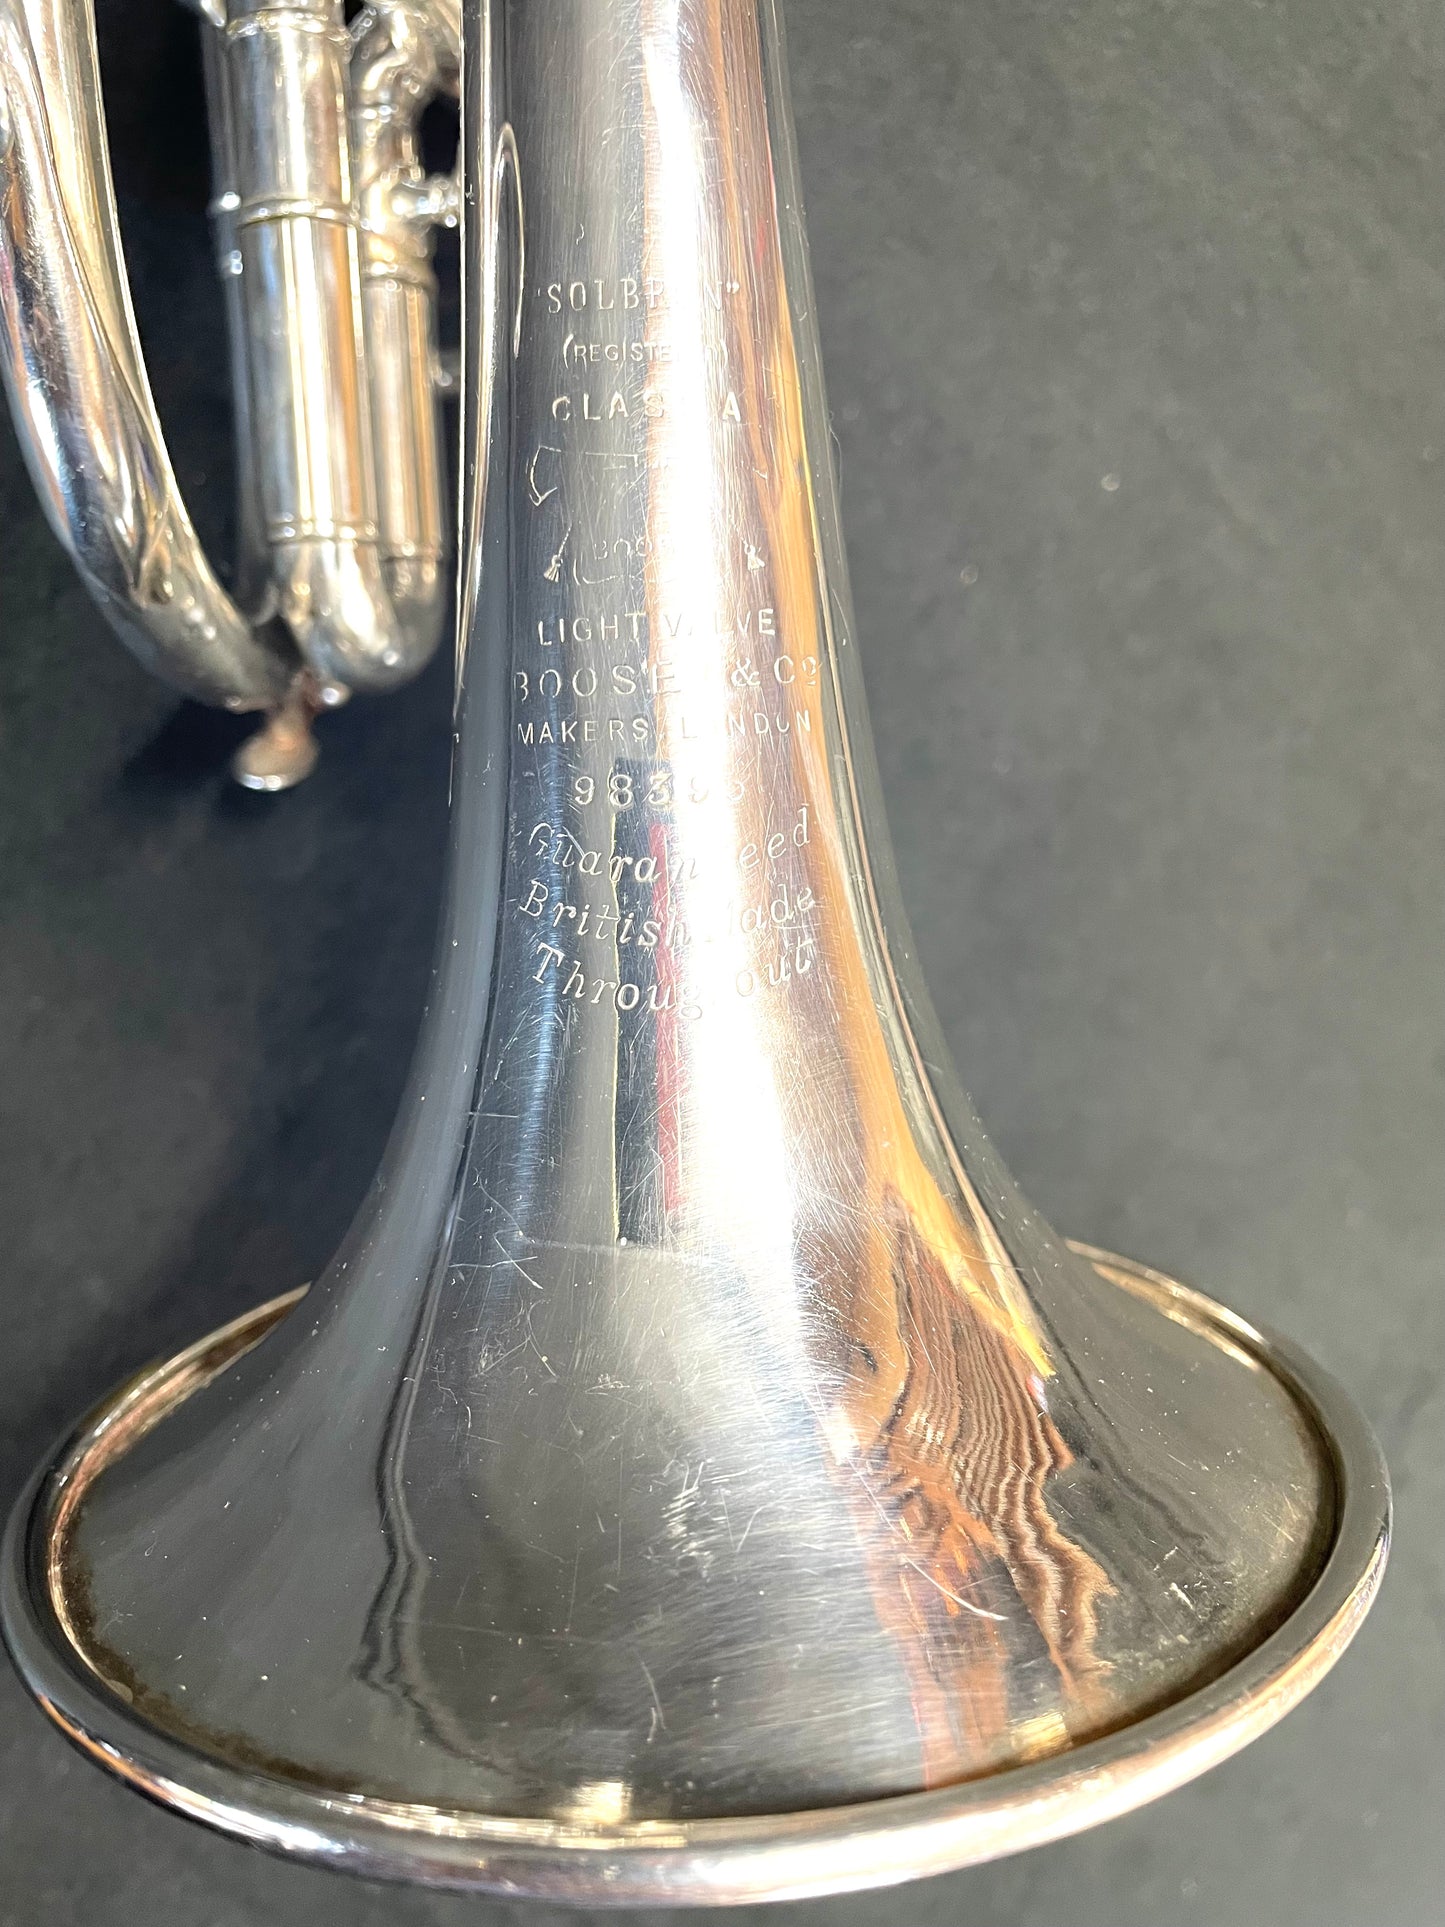 Boosey and Co Class A Solbron Bb Cornet - Circa 1916 - Student/Heritage/Collectors Instrument